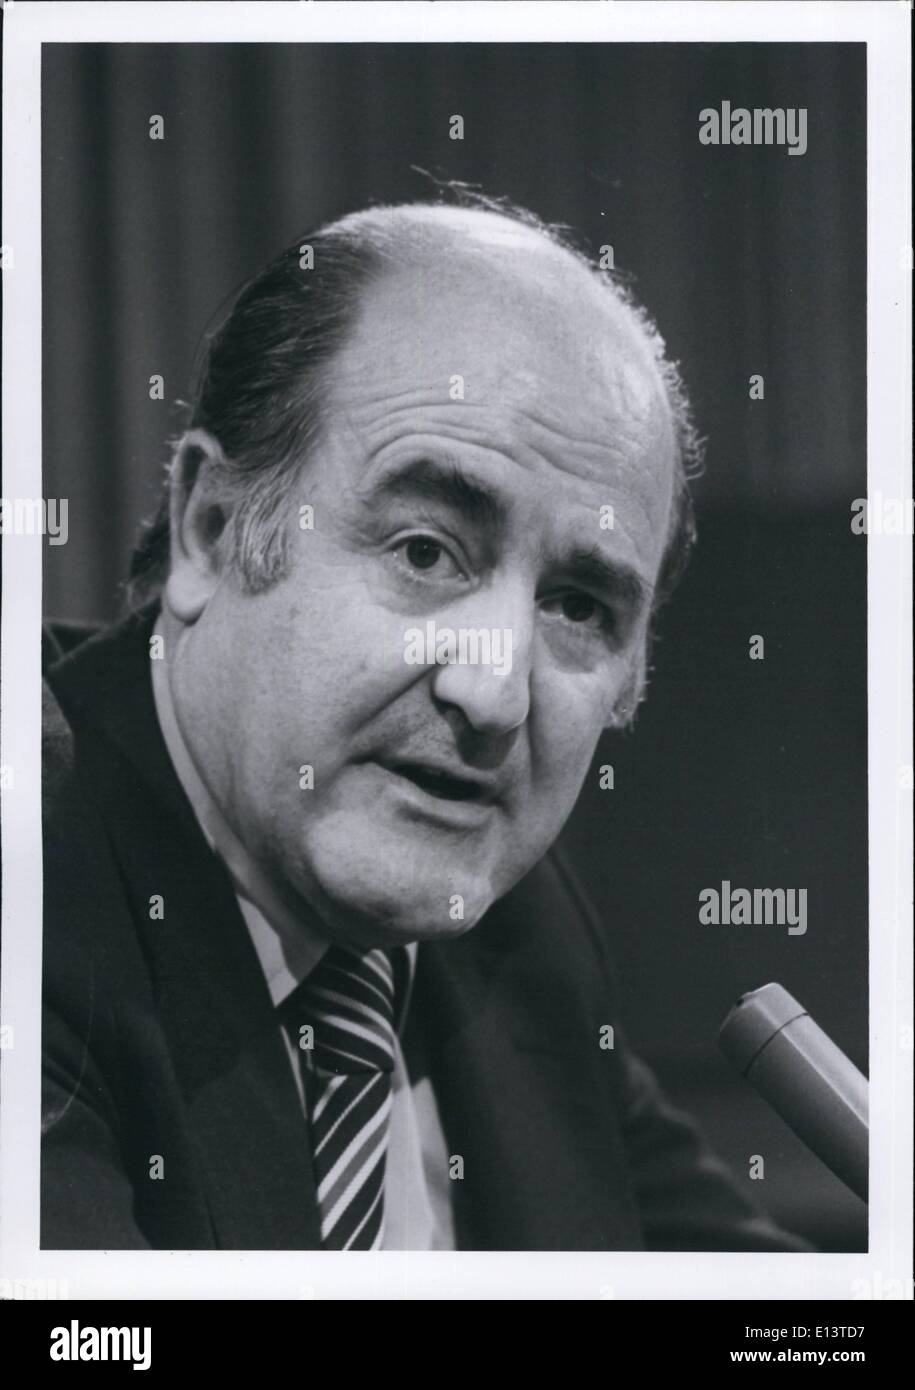 Mar. 27, 2012 - Alejandro Orfila: Secretary General of the Organization of American States (OAS) at a press conference at the UN, May 18, 1977. His name was mentioned with other Argentine politicians connected with a aluminum plant financial scandal in Argentina. Stock Photo